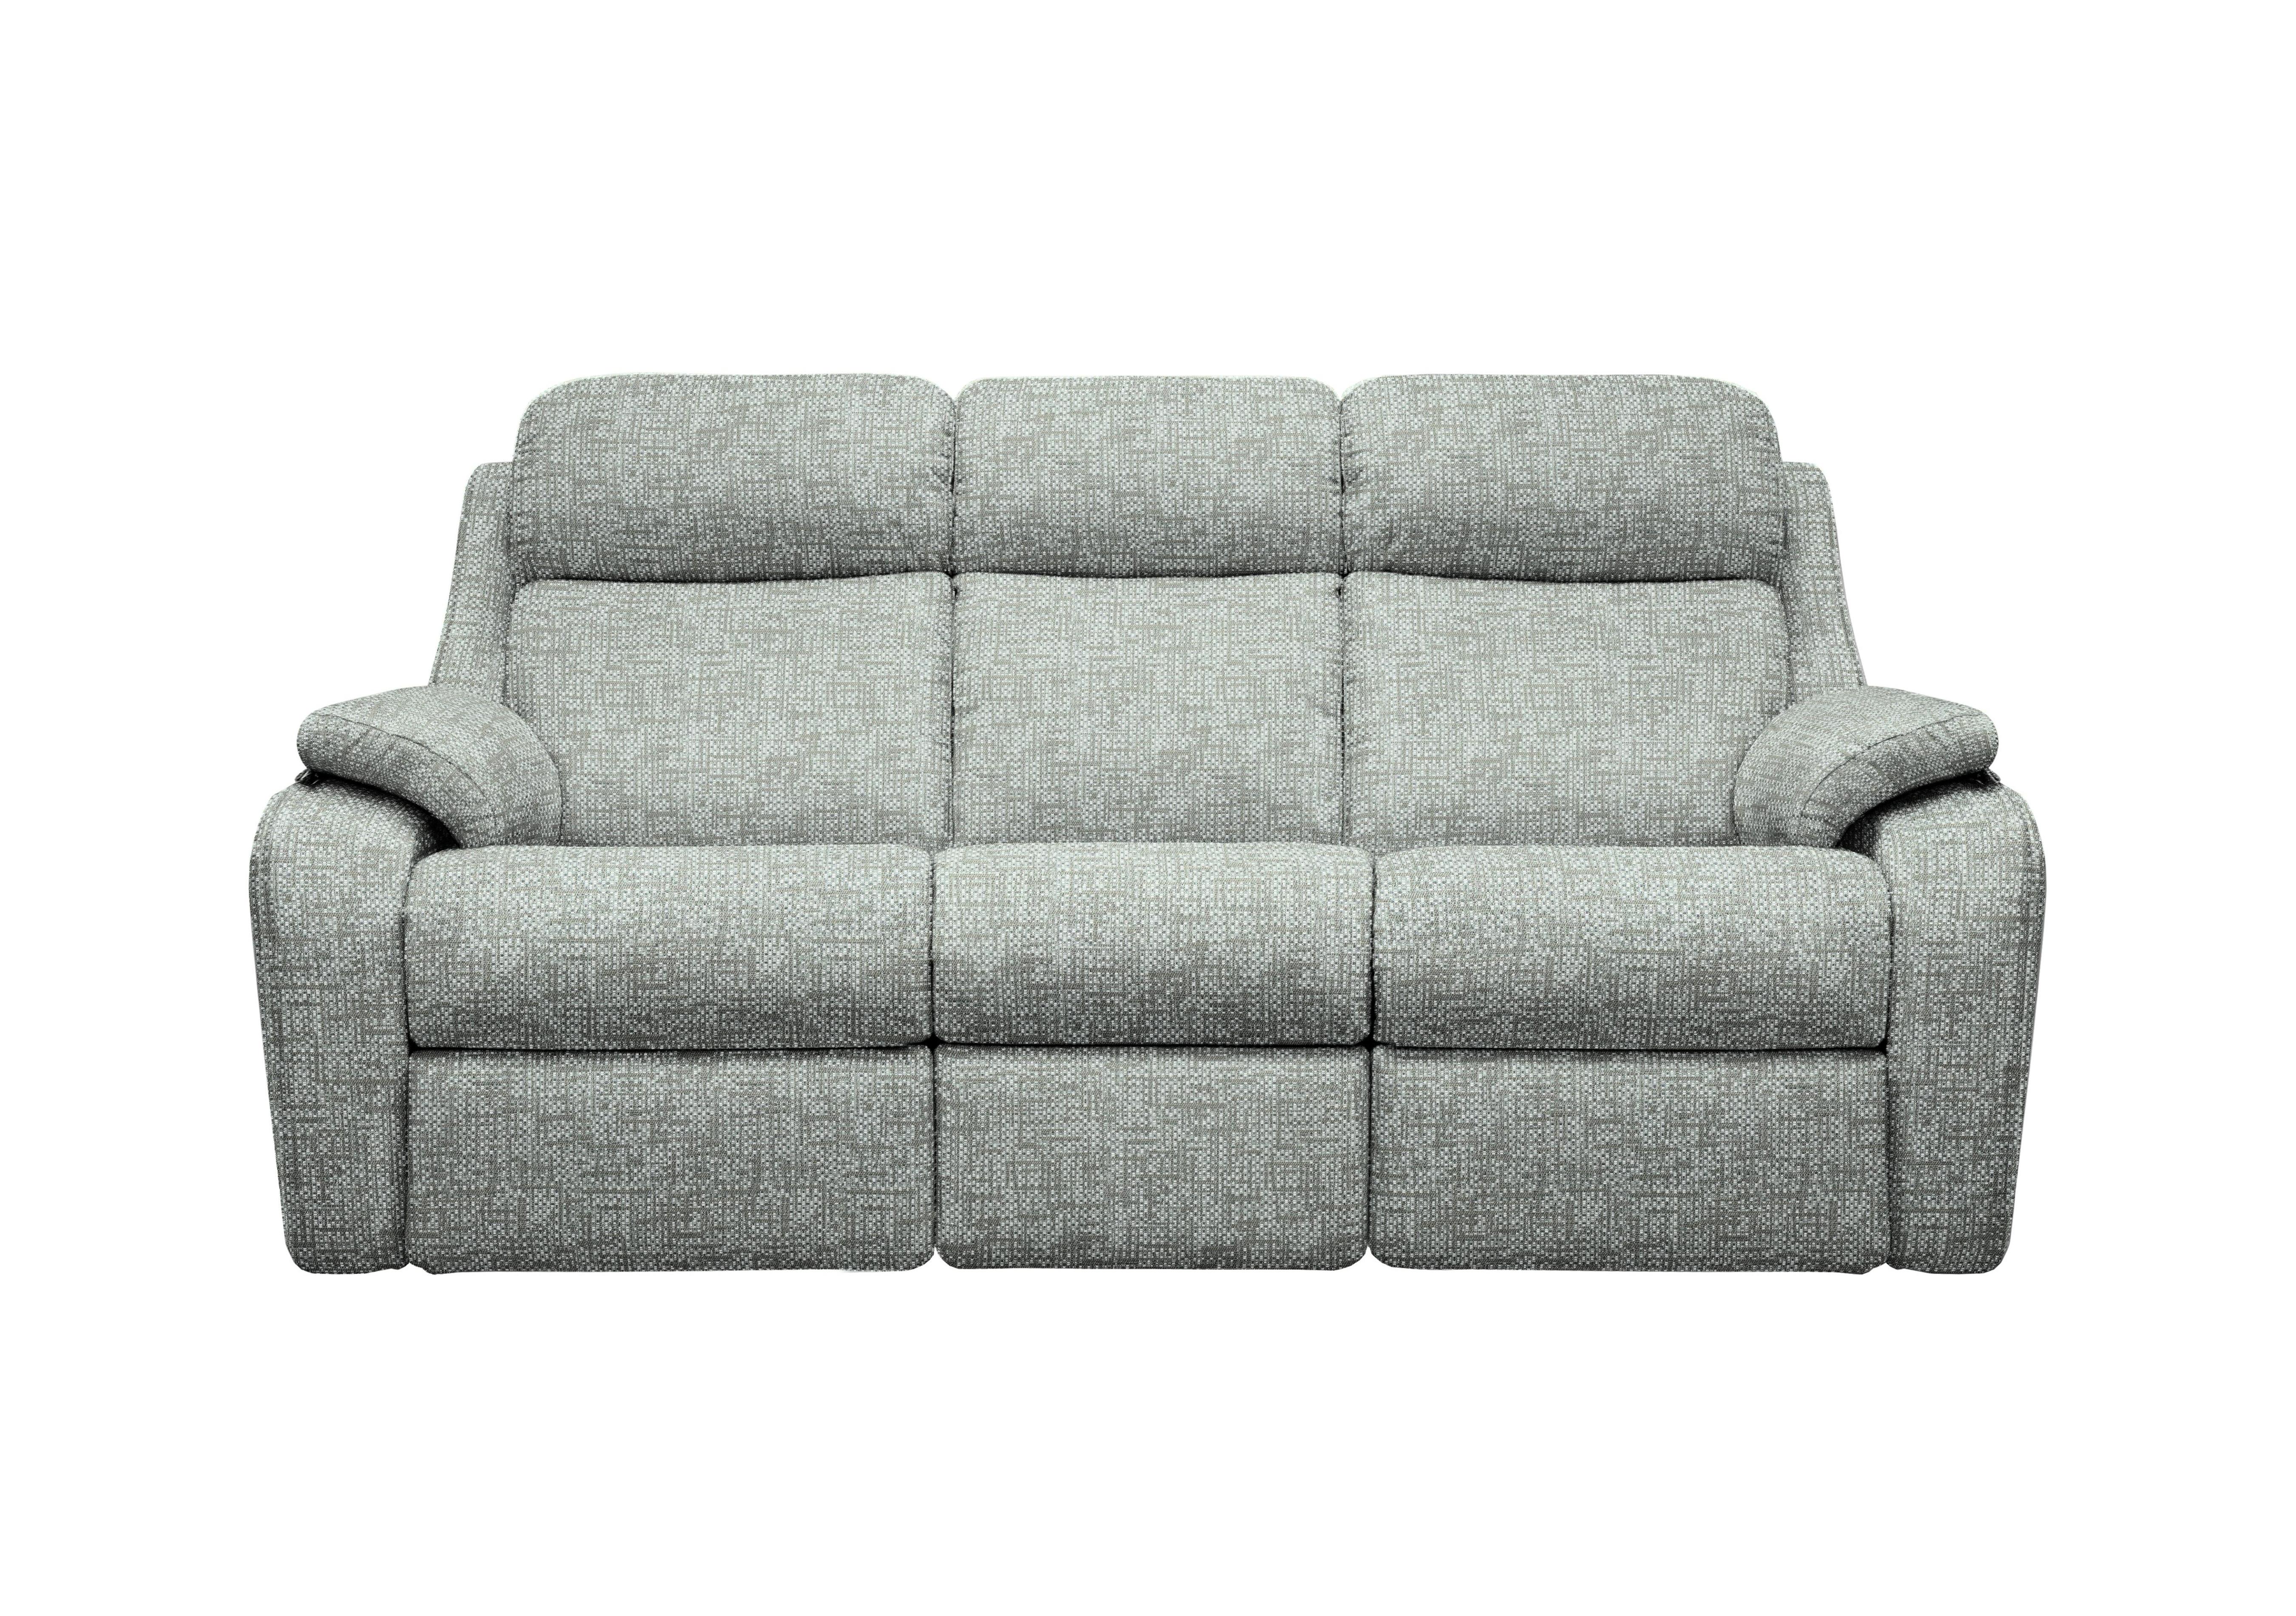 Kingsbury 3 Seater Fabric Sofa in B032 Remco Duck Egg on Furniture Village